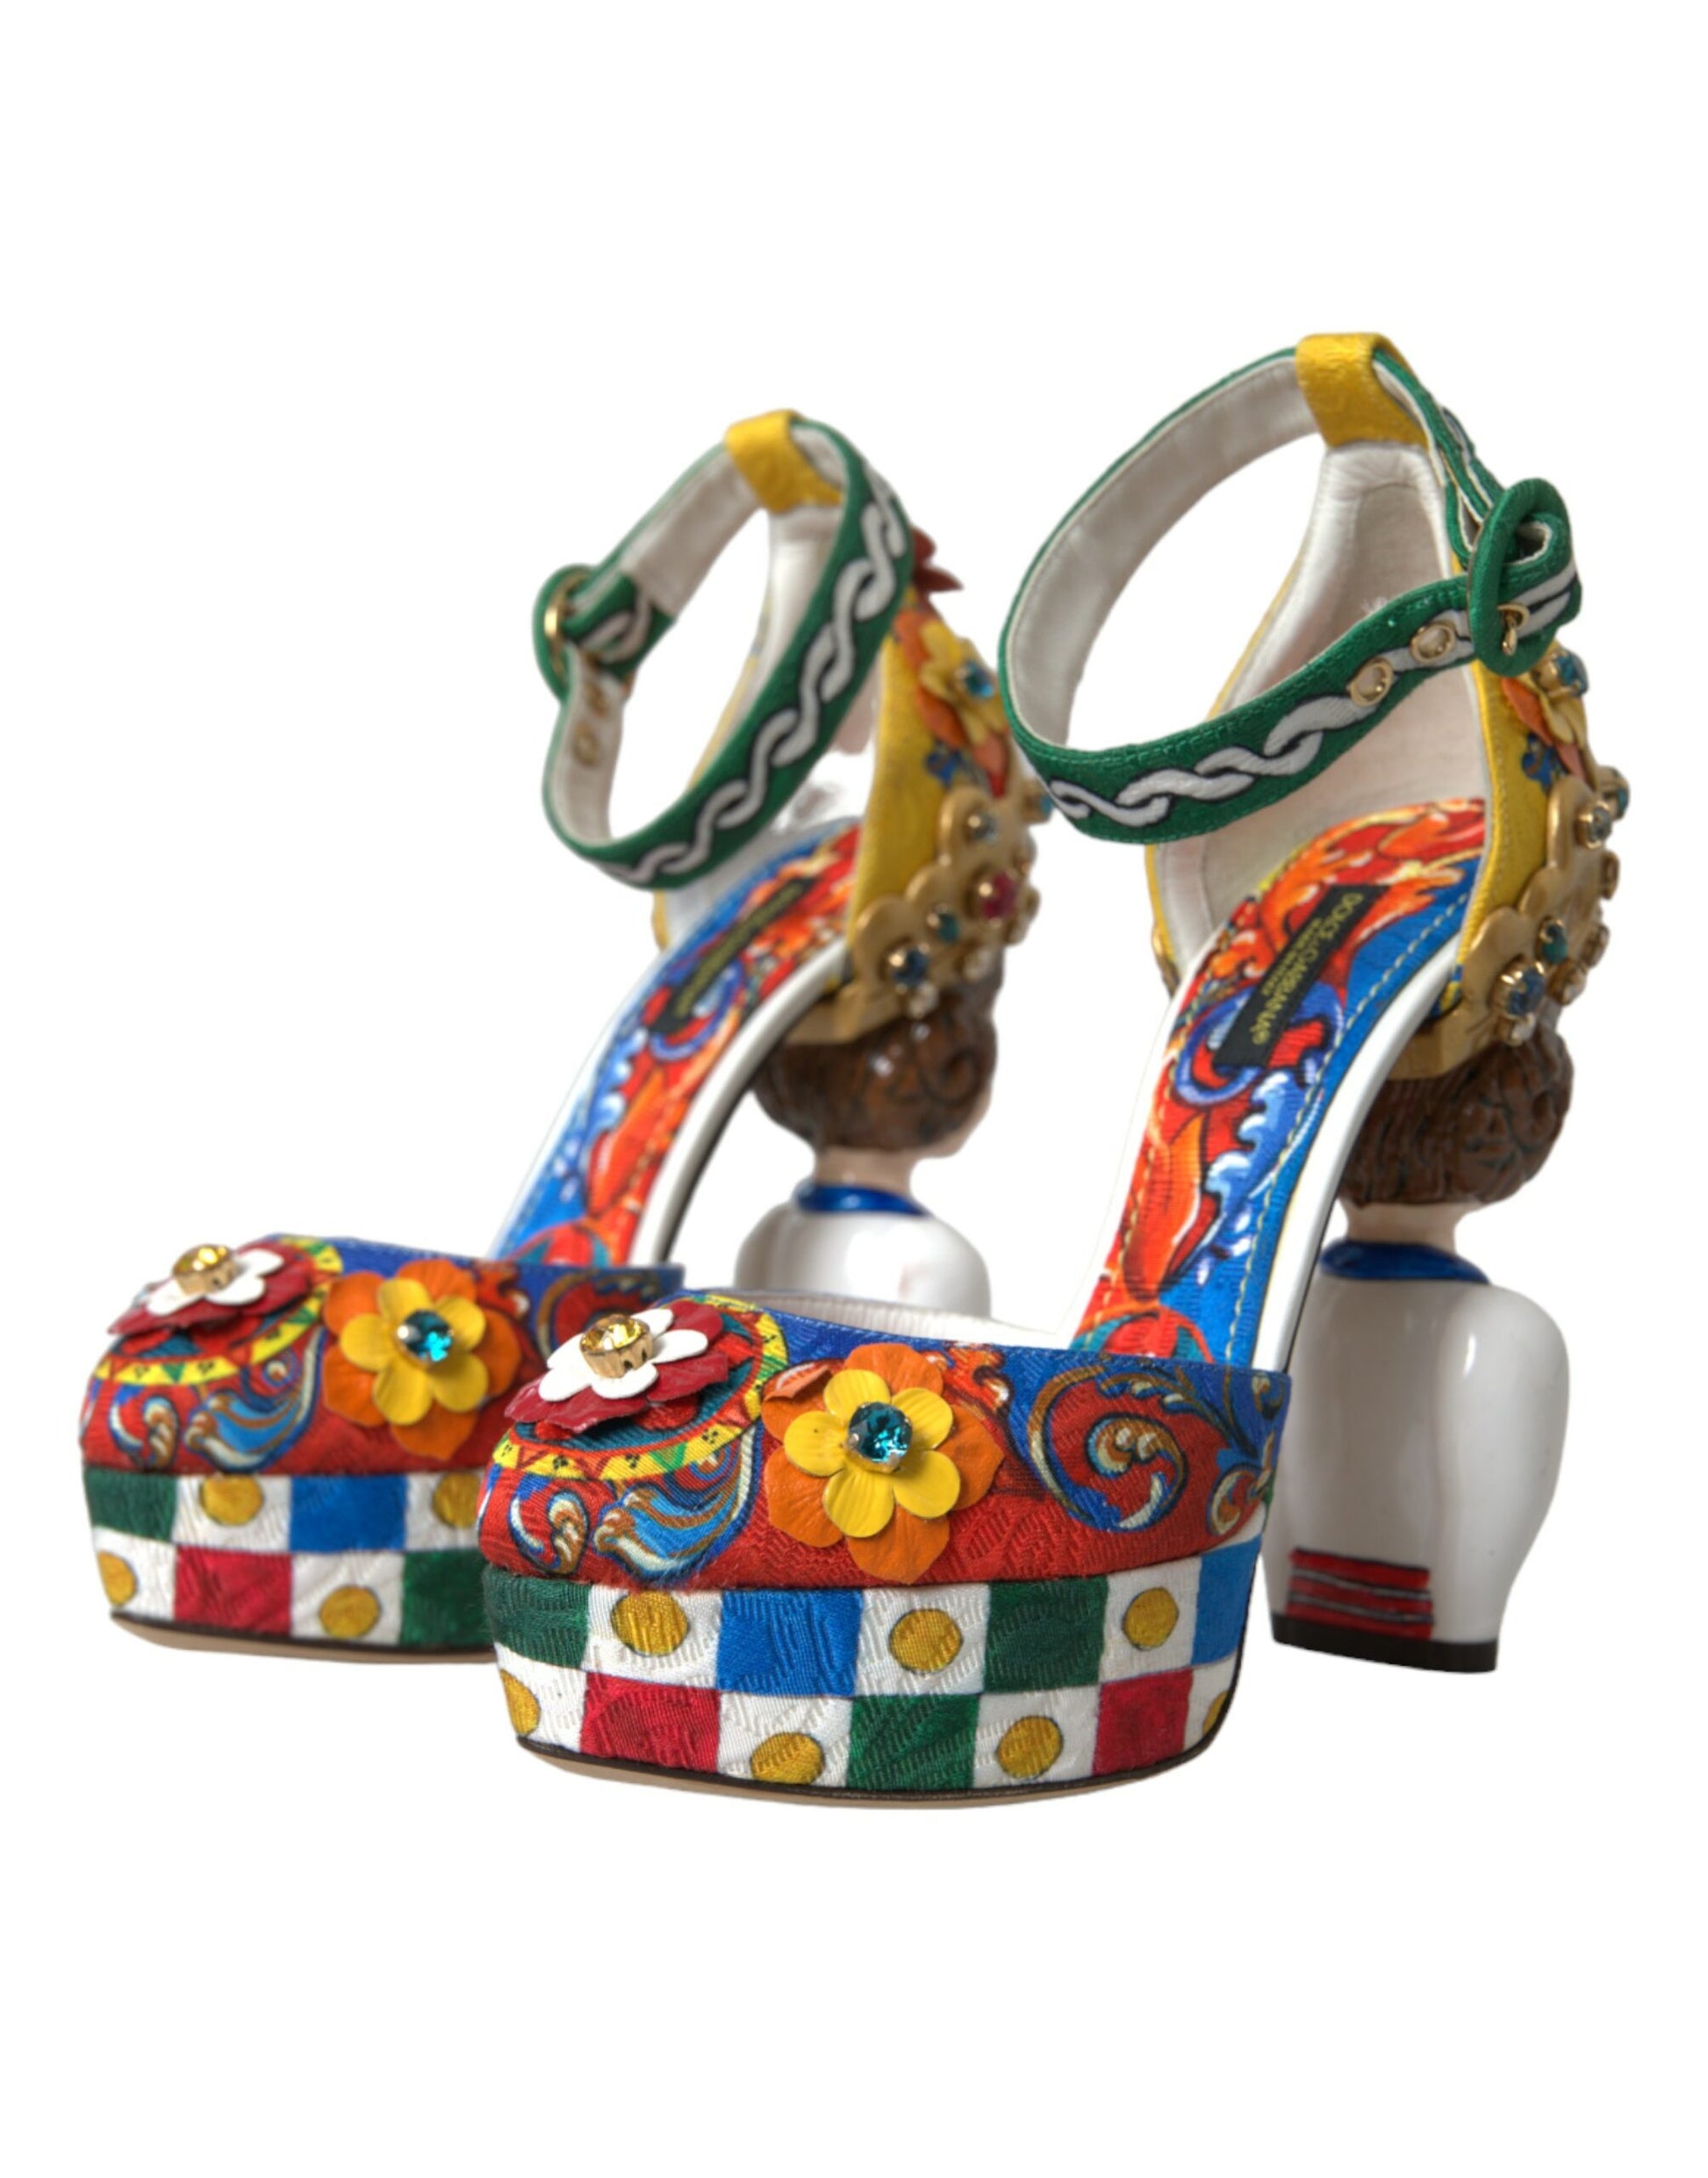 Dolce & Gabbana Multicolor Carretto Embellished Sandals Shoes